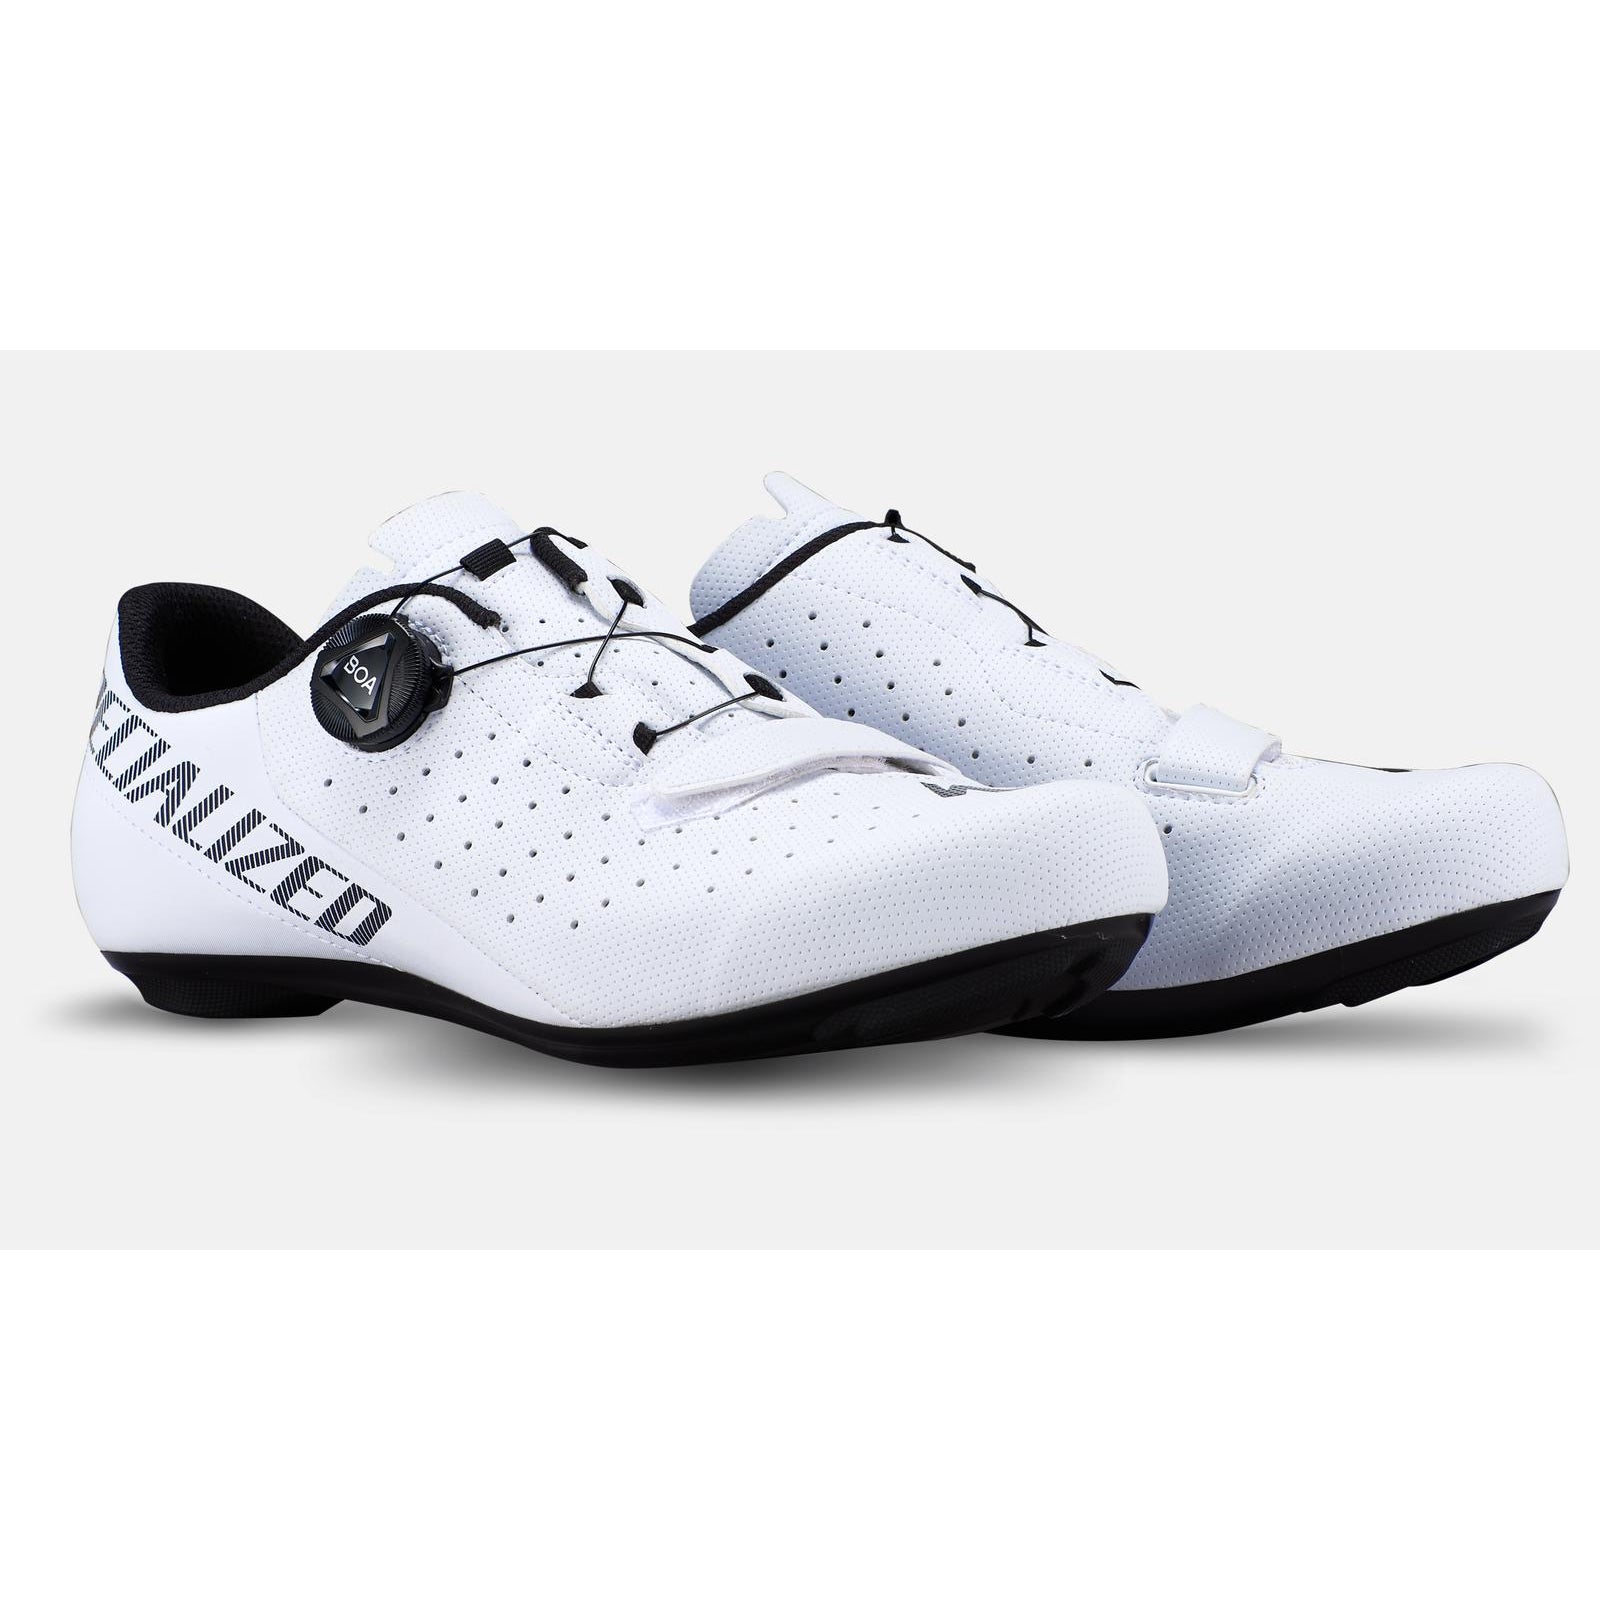 Specialized Torch 1.0 Road Bike Shoes - Shoes - Bicycle Warehouse